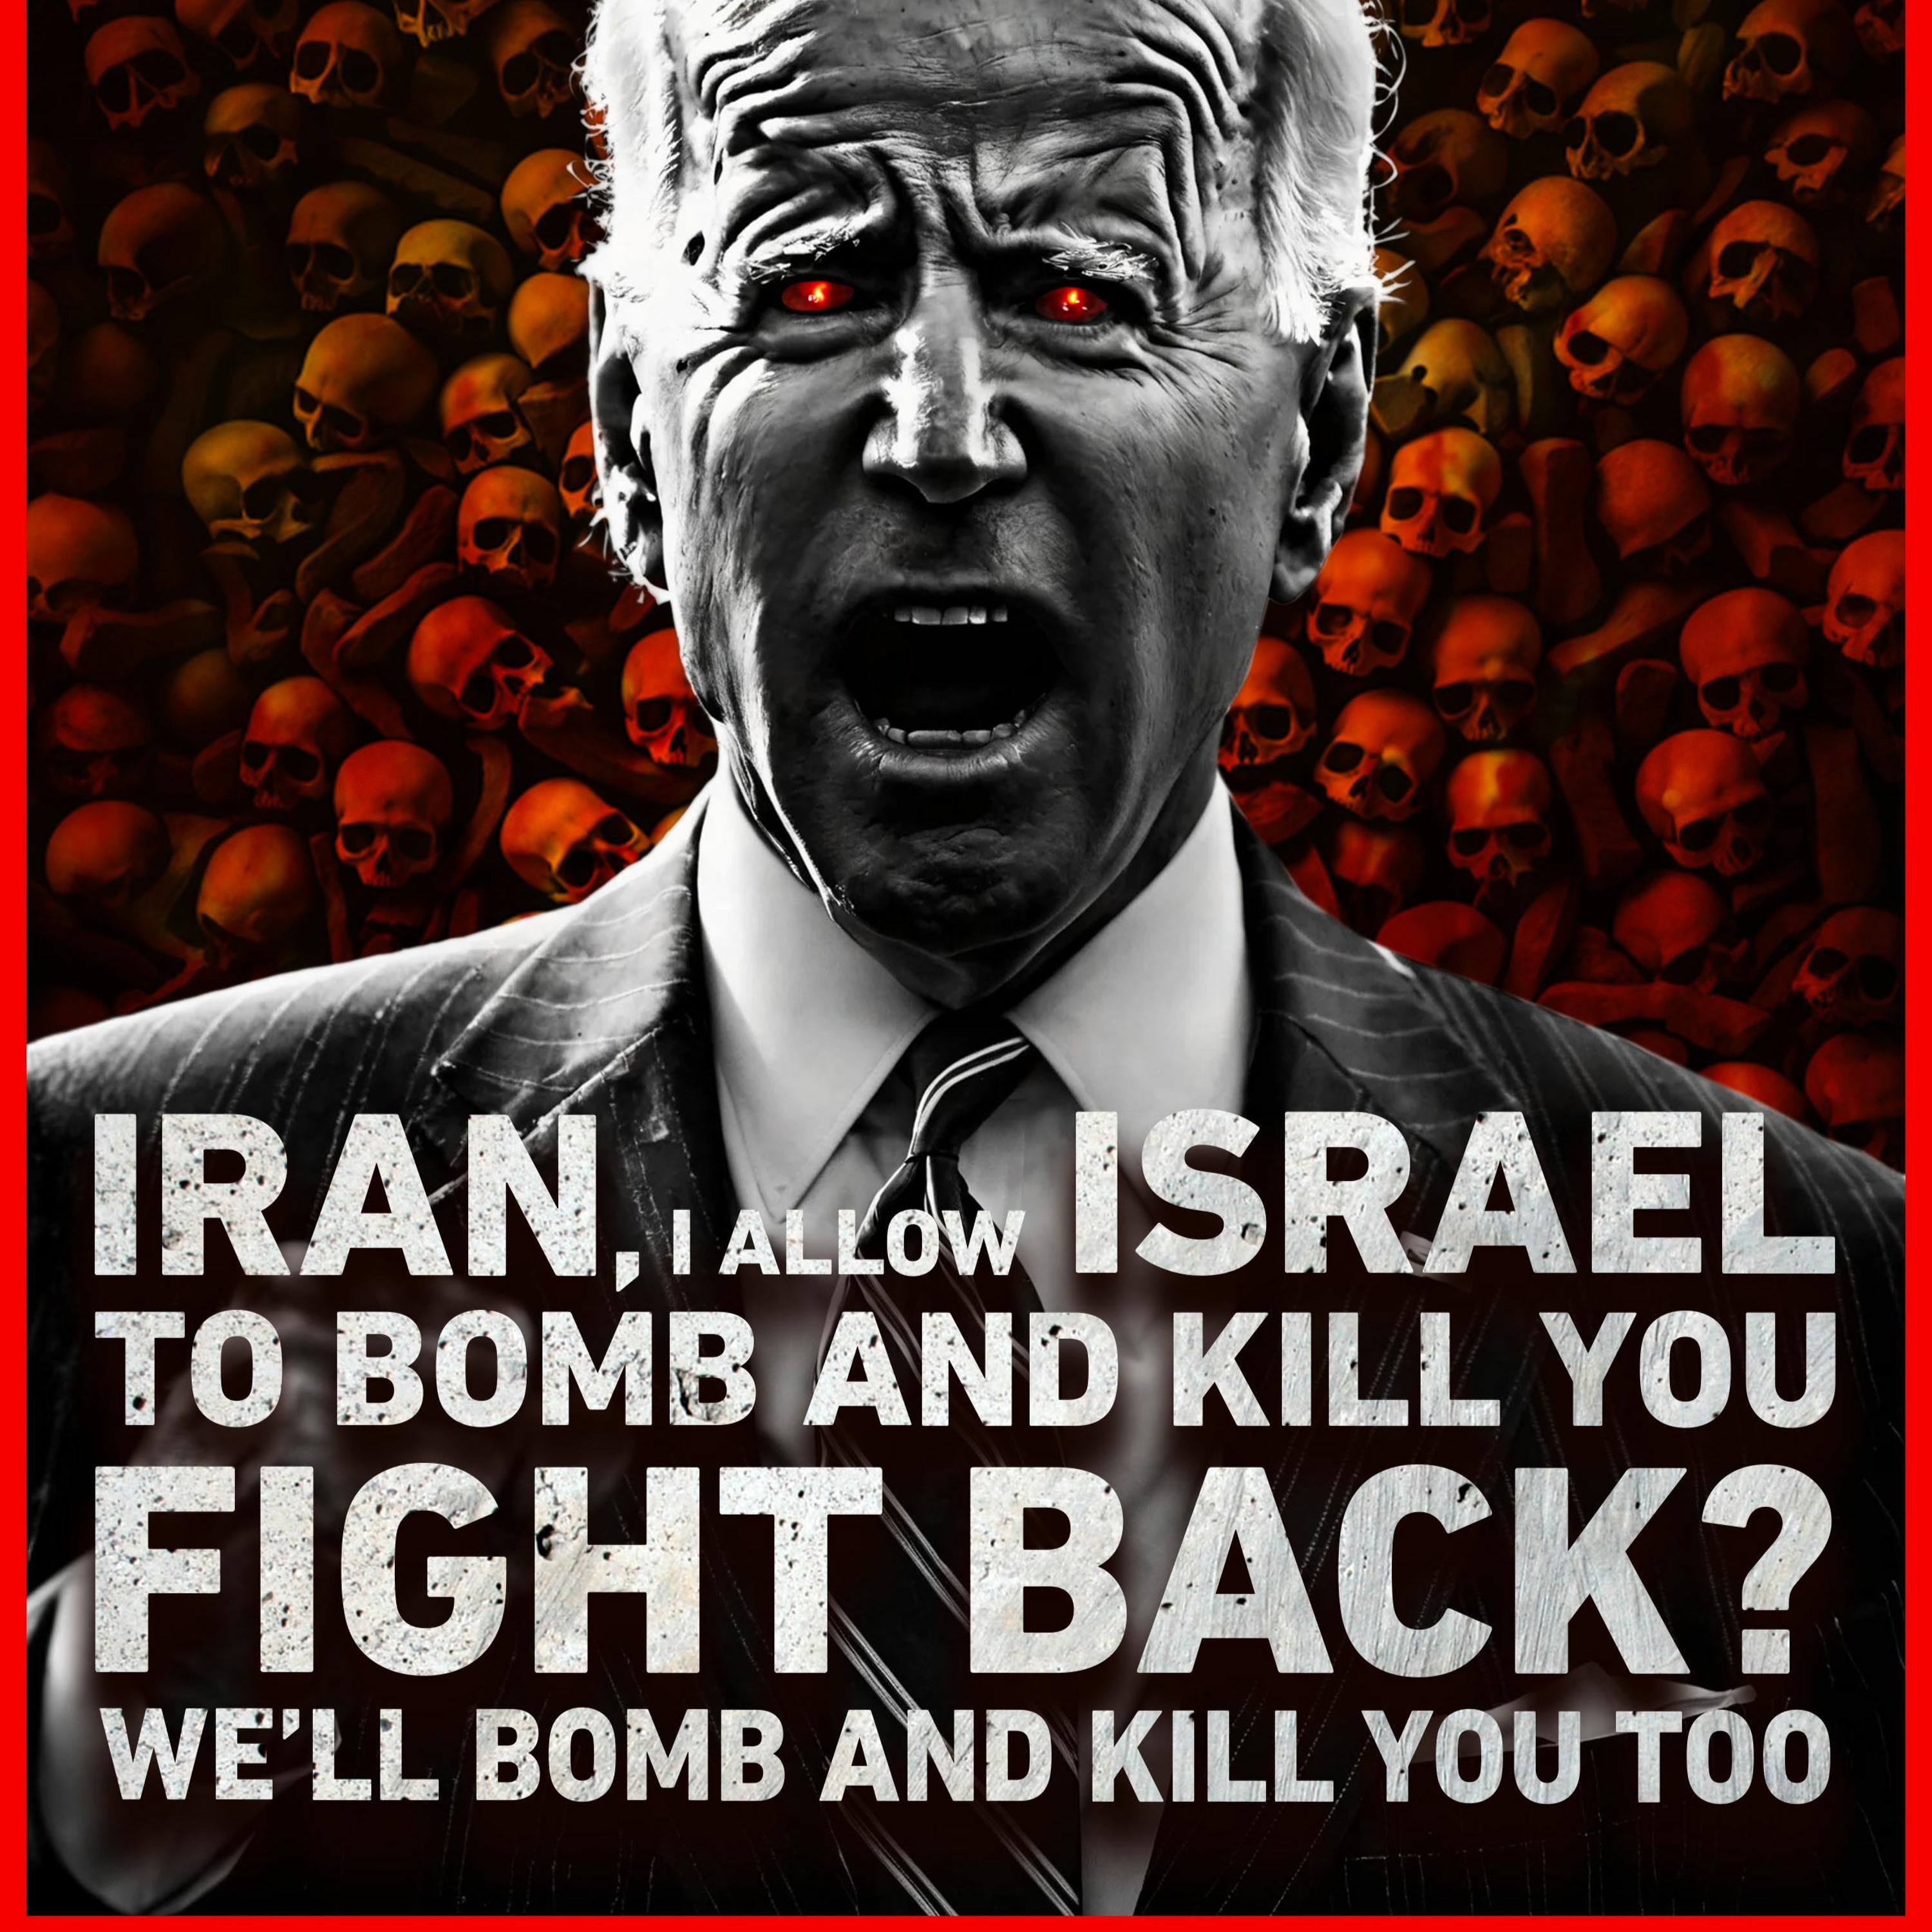 IRAN, I ALLOW ISRAEL TO BOMB AND KILL YOU! FIGHT BACK? WE’LL BOMB AND KILL YOU TOO!